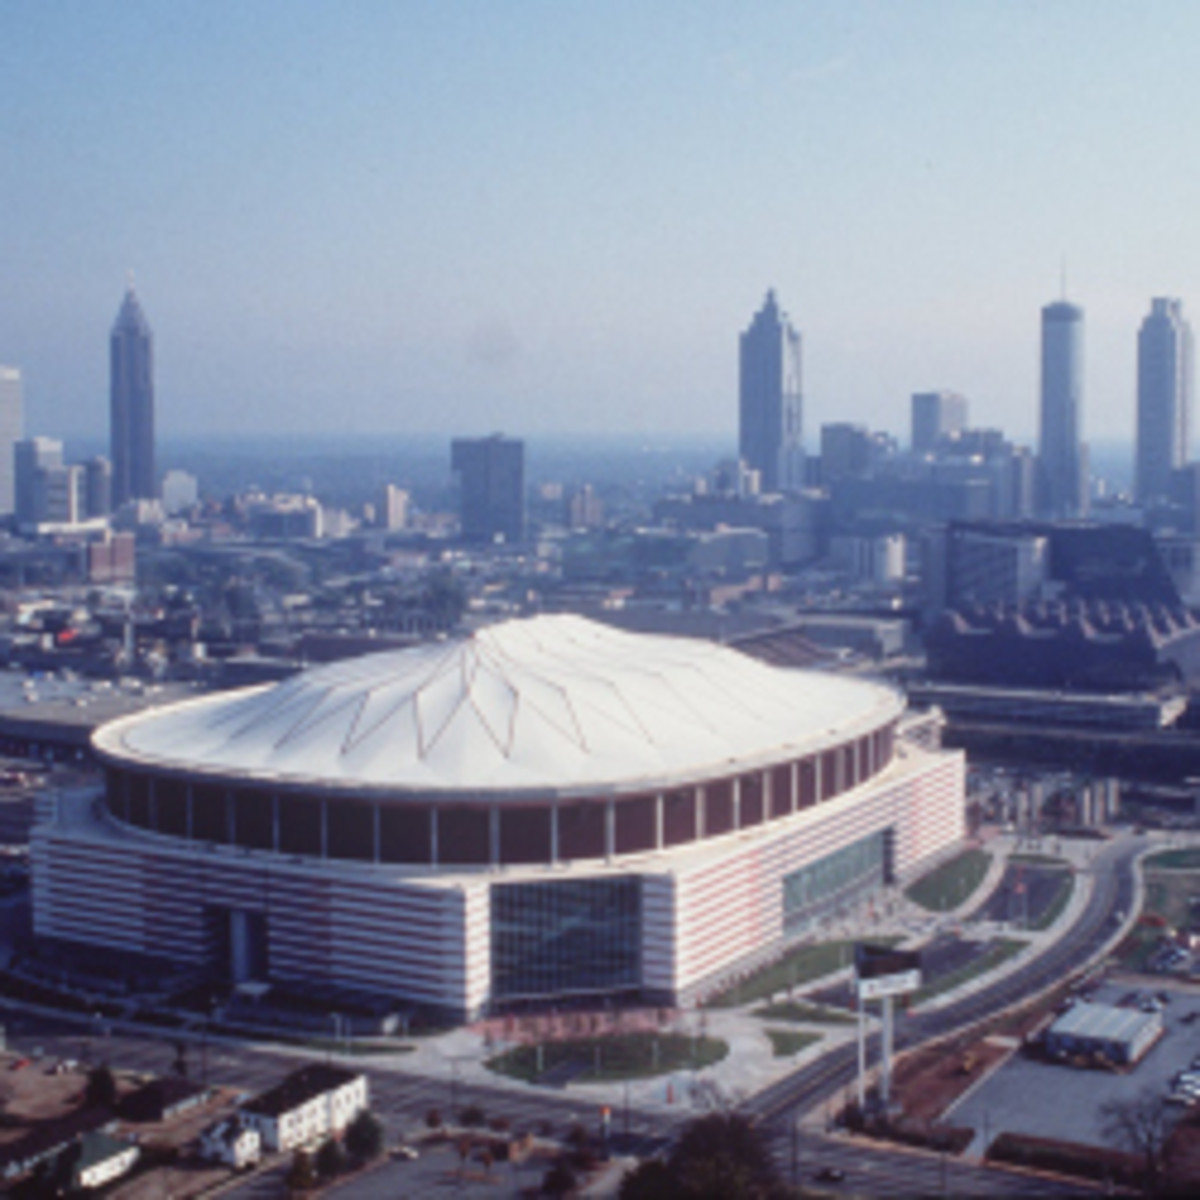 The Falcons and mayor of Atlanta have reached an agreement about a new stadium to replace the 21-year-old Georgia Dome. (Ken Levine/Getty Images)